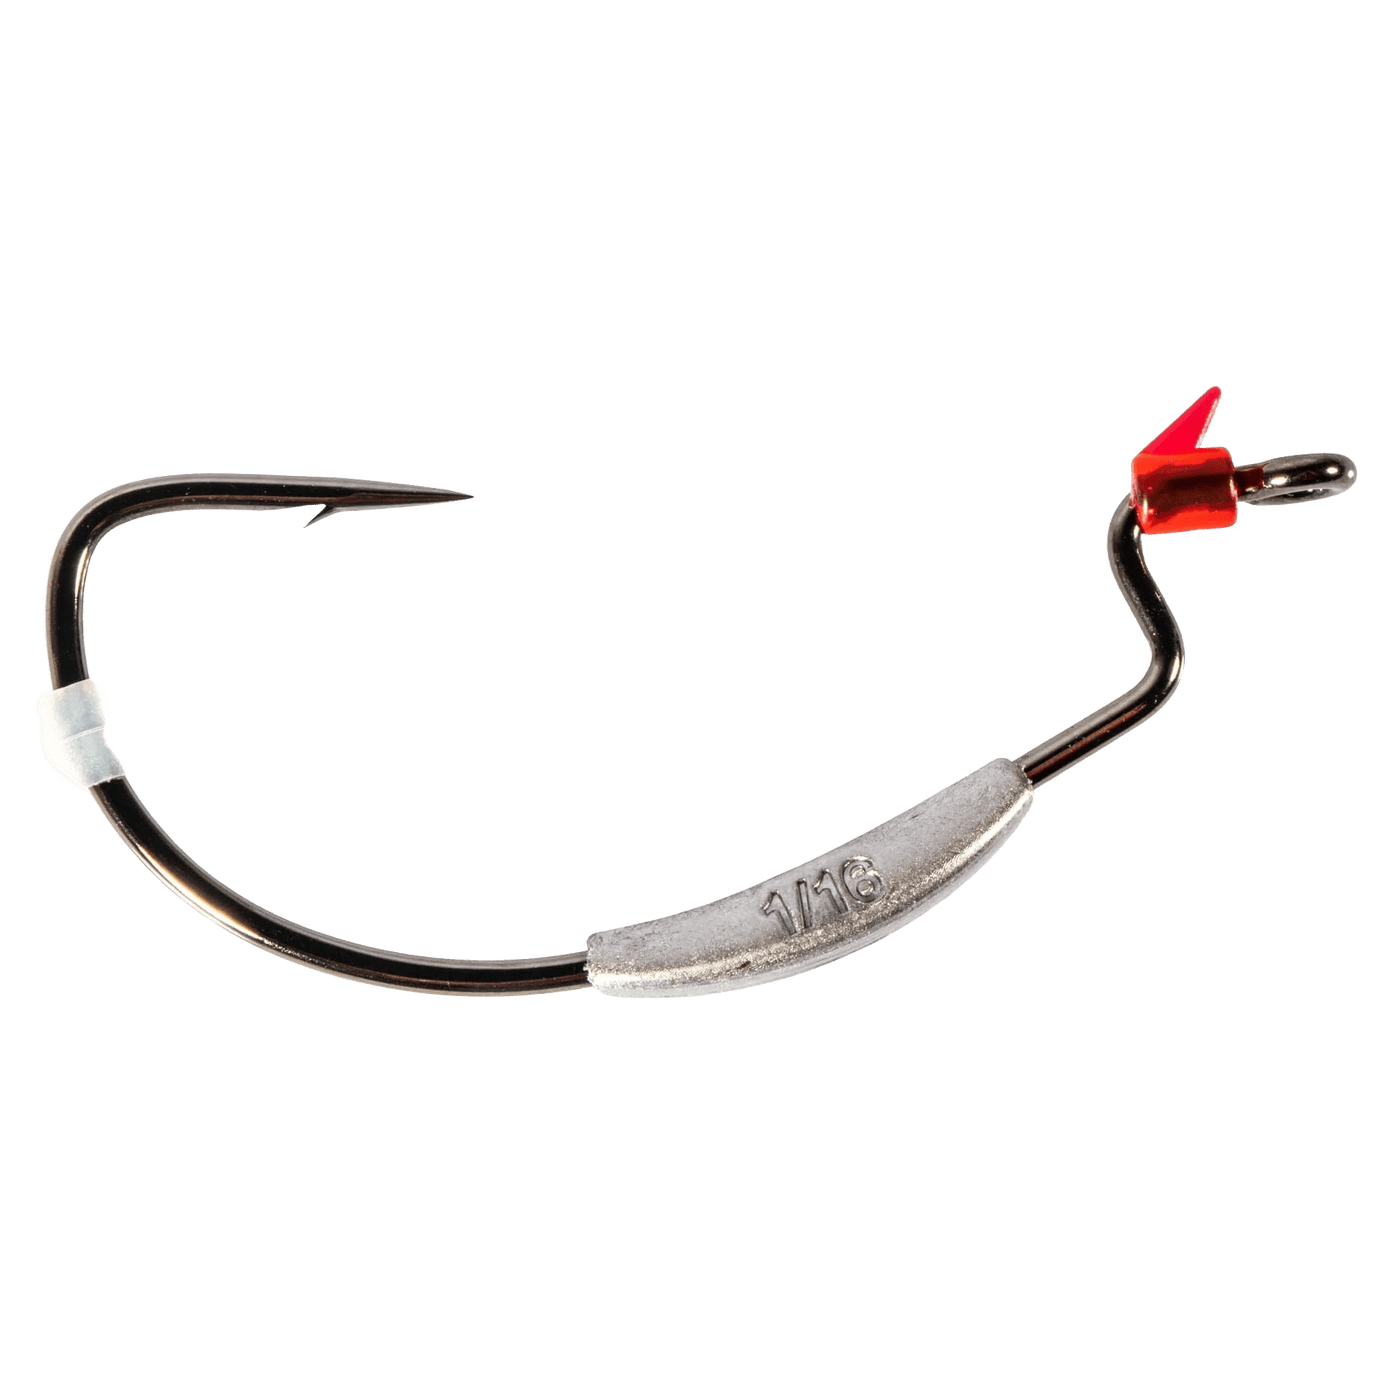 Z-Man - ZWG Weighted Swimbait Hook Tackle Z-Man Fishing Products 